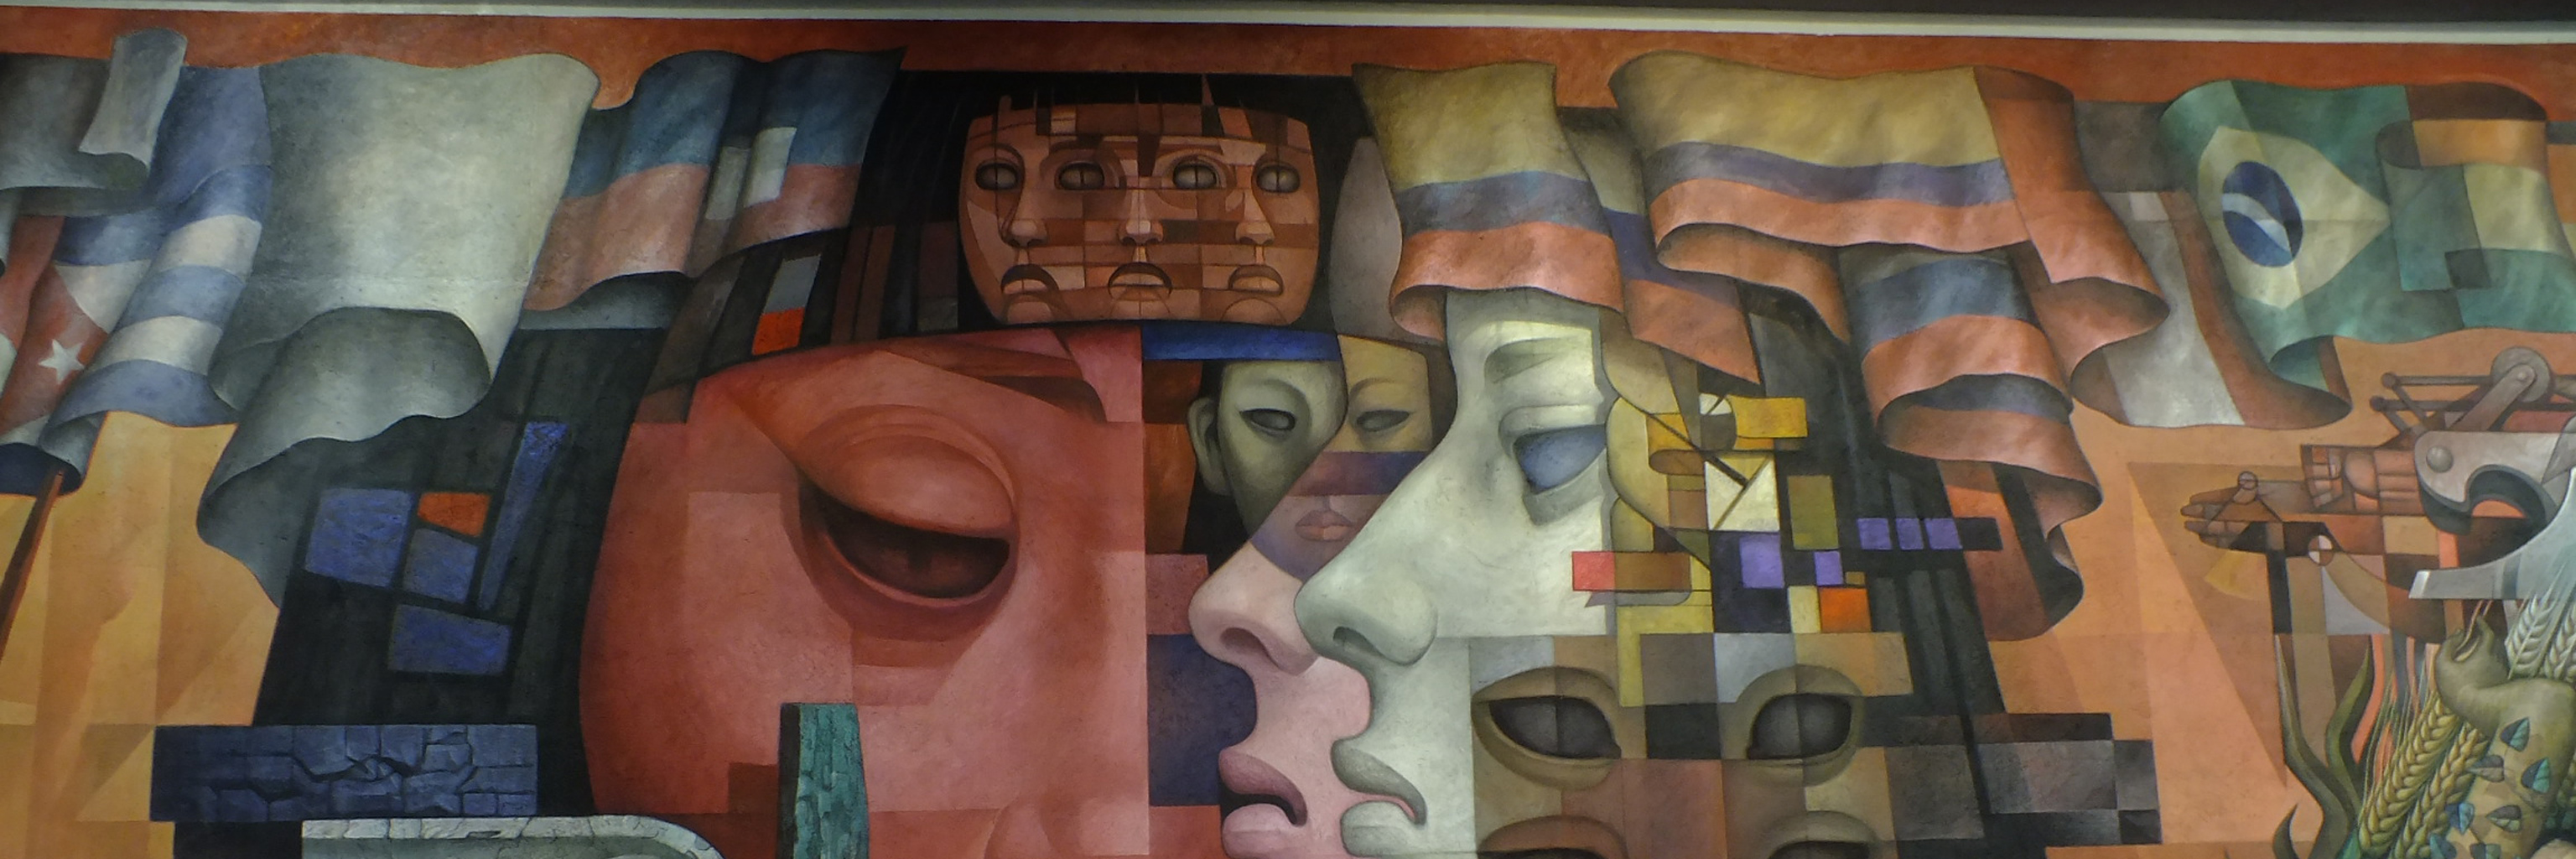 Presencia de América Latina is a 300-square-meter mural, painted in acrylics on rough stucco, is located in the lobby of the Casa del Arte of the University of Concepción Chile. Its principal theme is the unity and brotherhood of the different Latin American cultures.